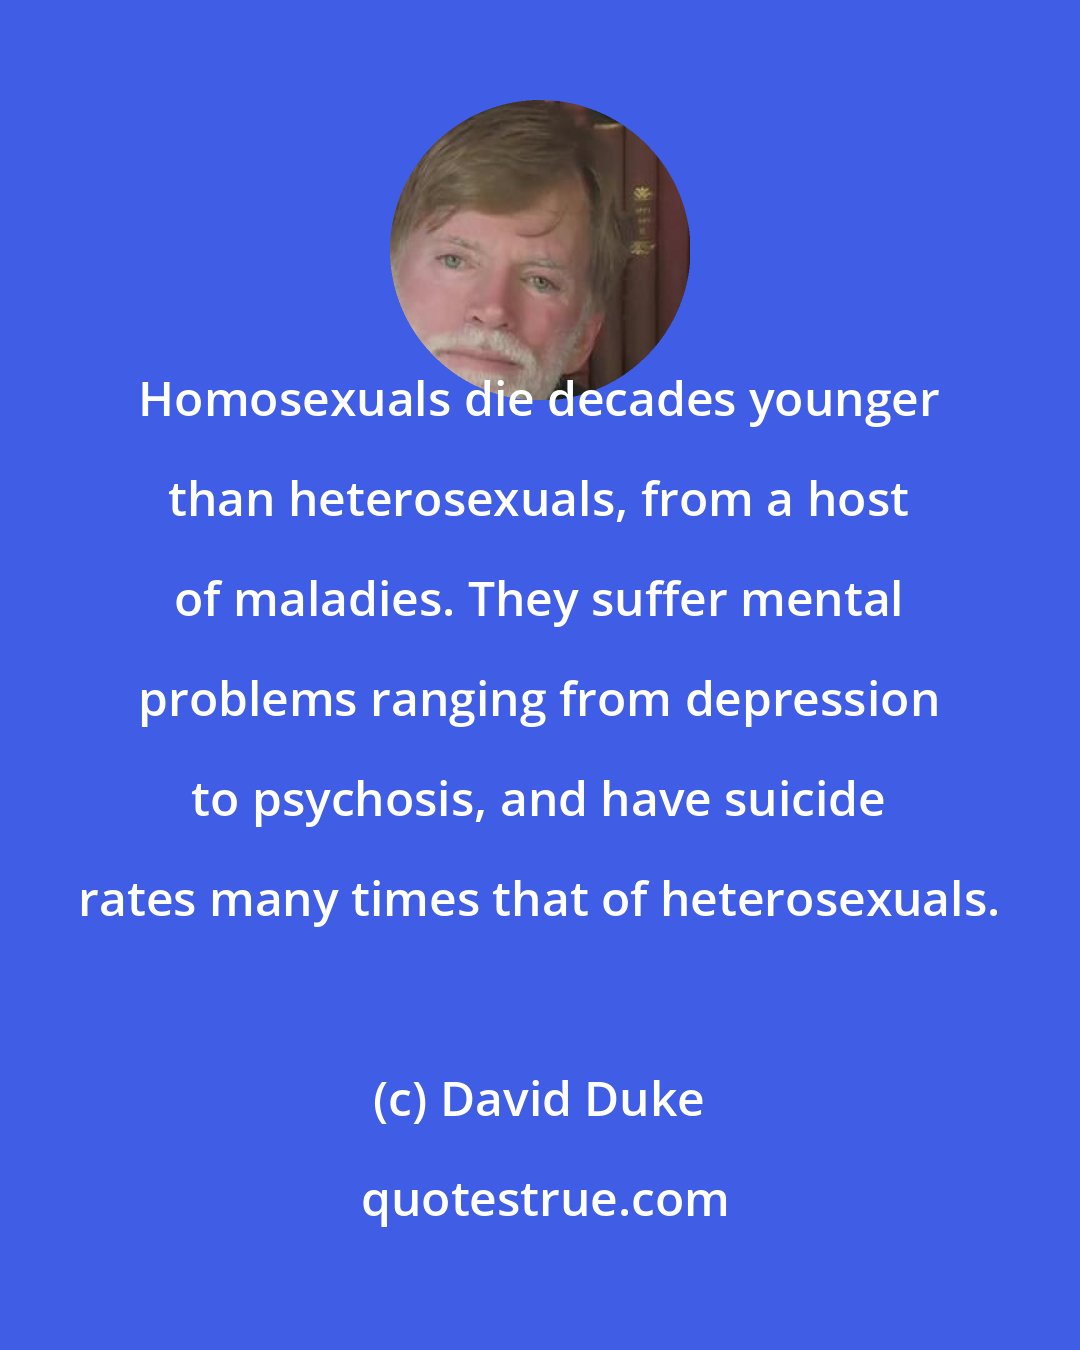 David Duke: Homosexuals die decades younger than heterosexuals, from a host of maladies. They suffer mental problems ranging from depression to psychosis, and have suicide rates many times that of heterosexuals.